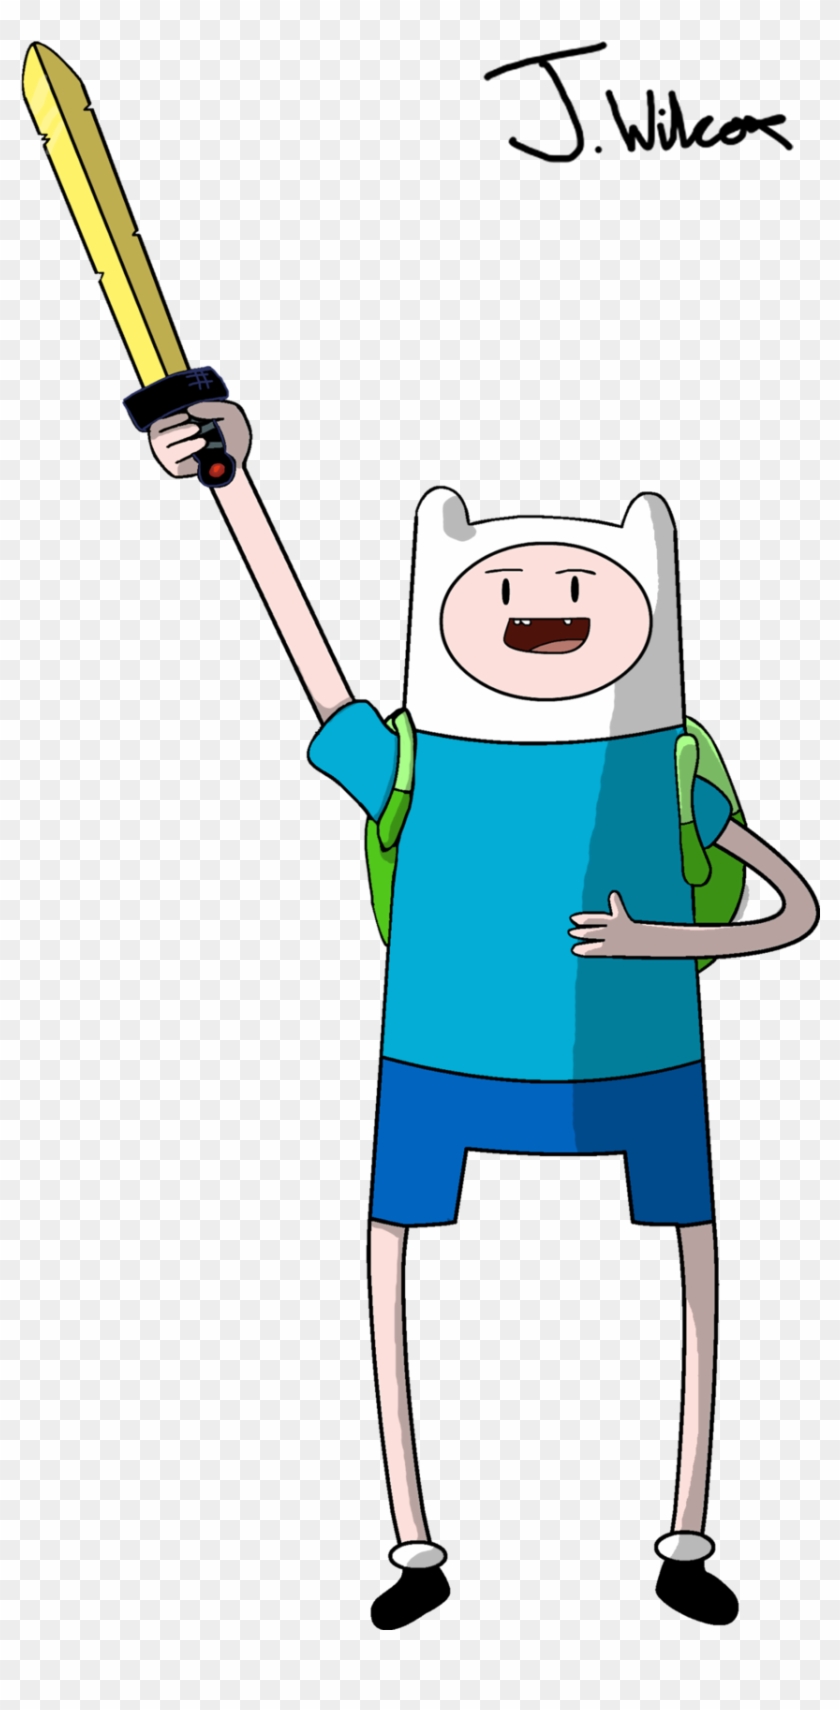 Make Sure To Clean Your Wall With A Dry Cloth/towel - Finn The Human Adventure Time #528310